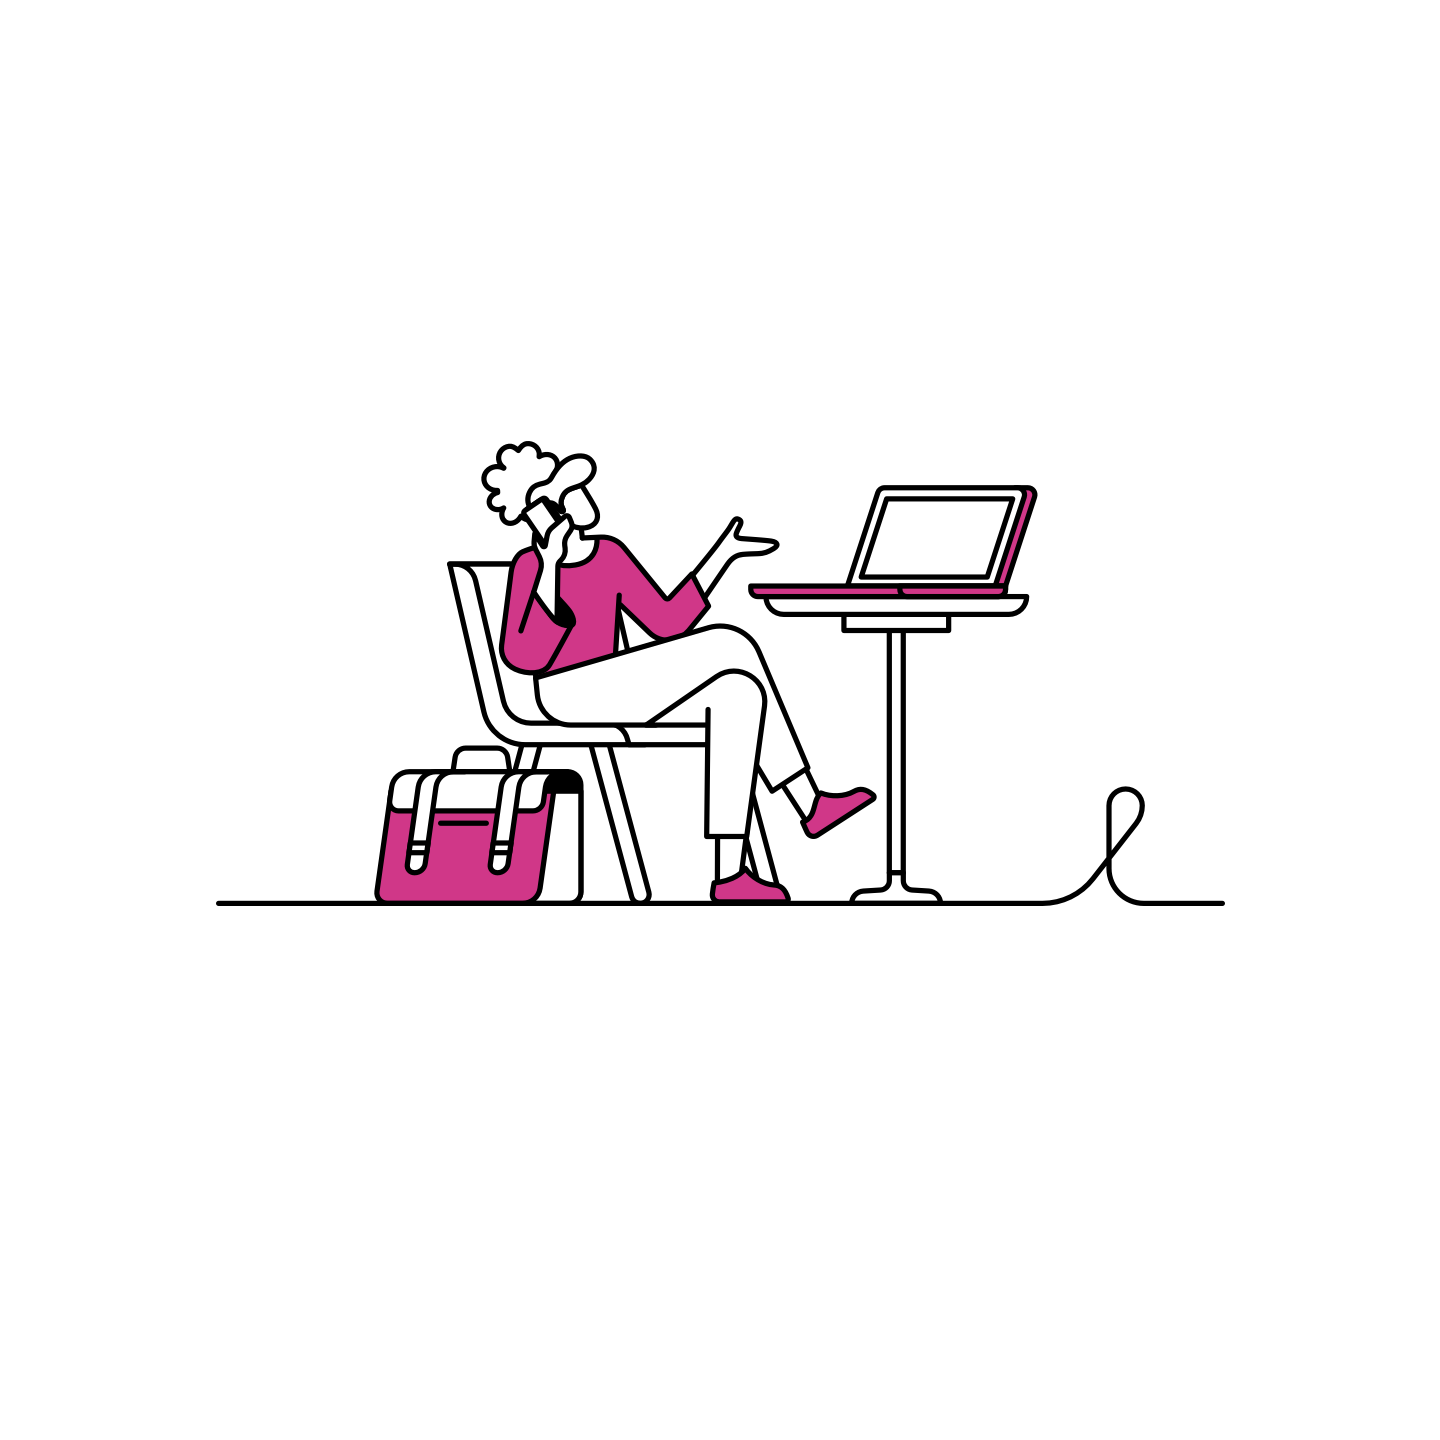 An illustration of someone talking on the phone, with a laptop in front of them